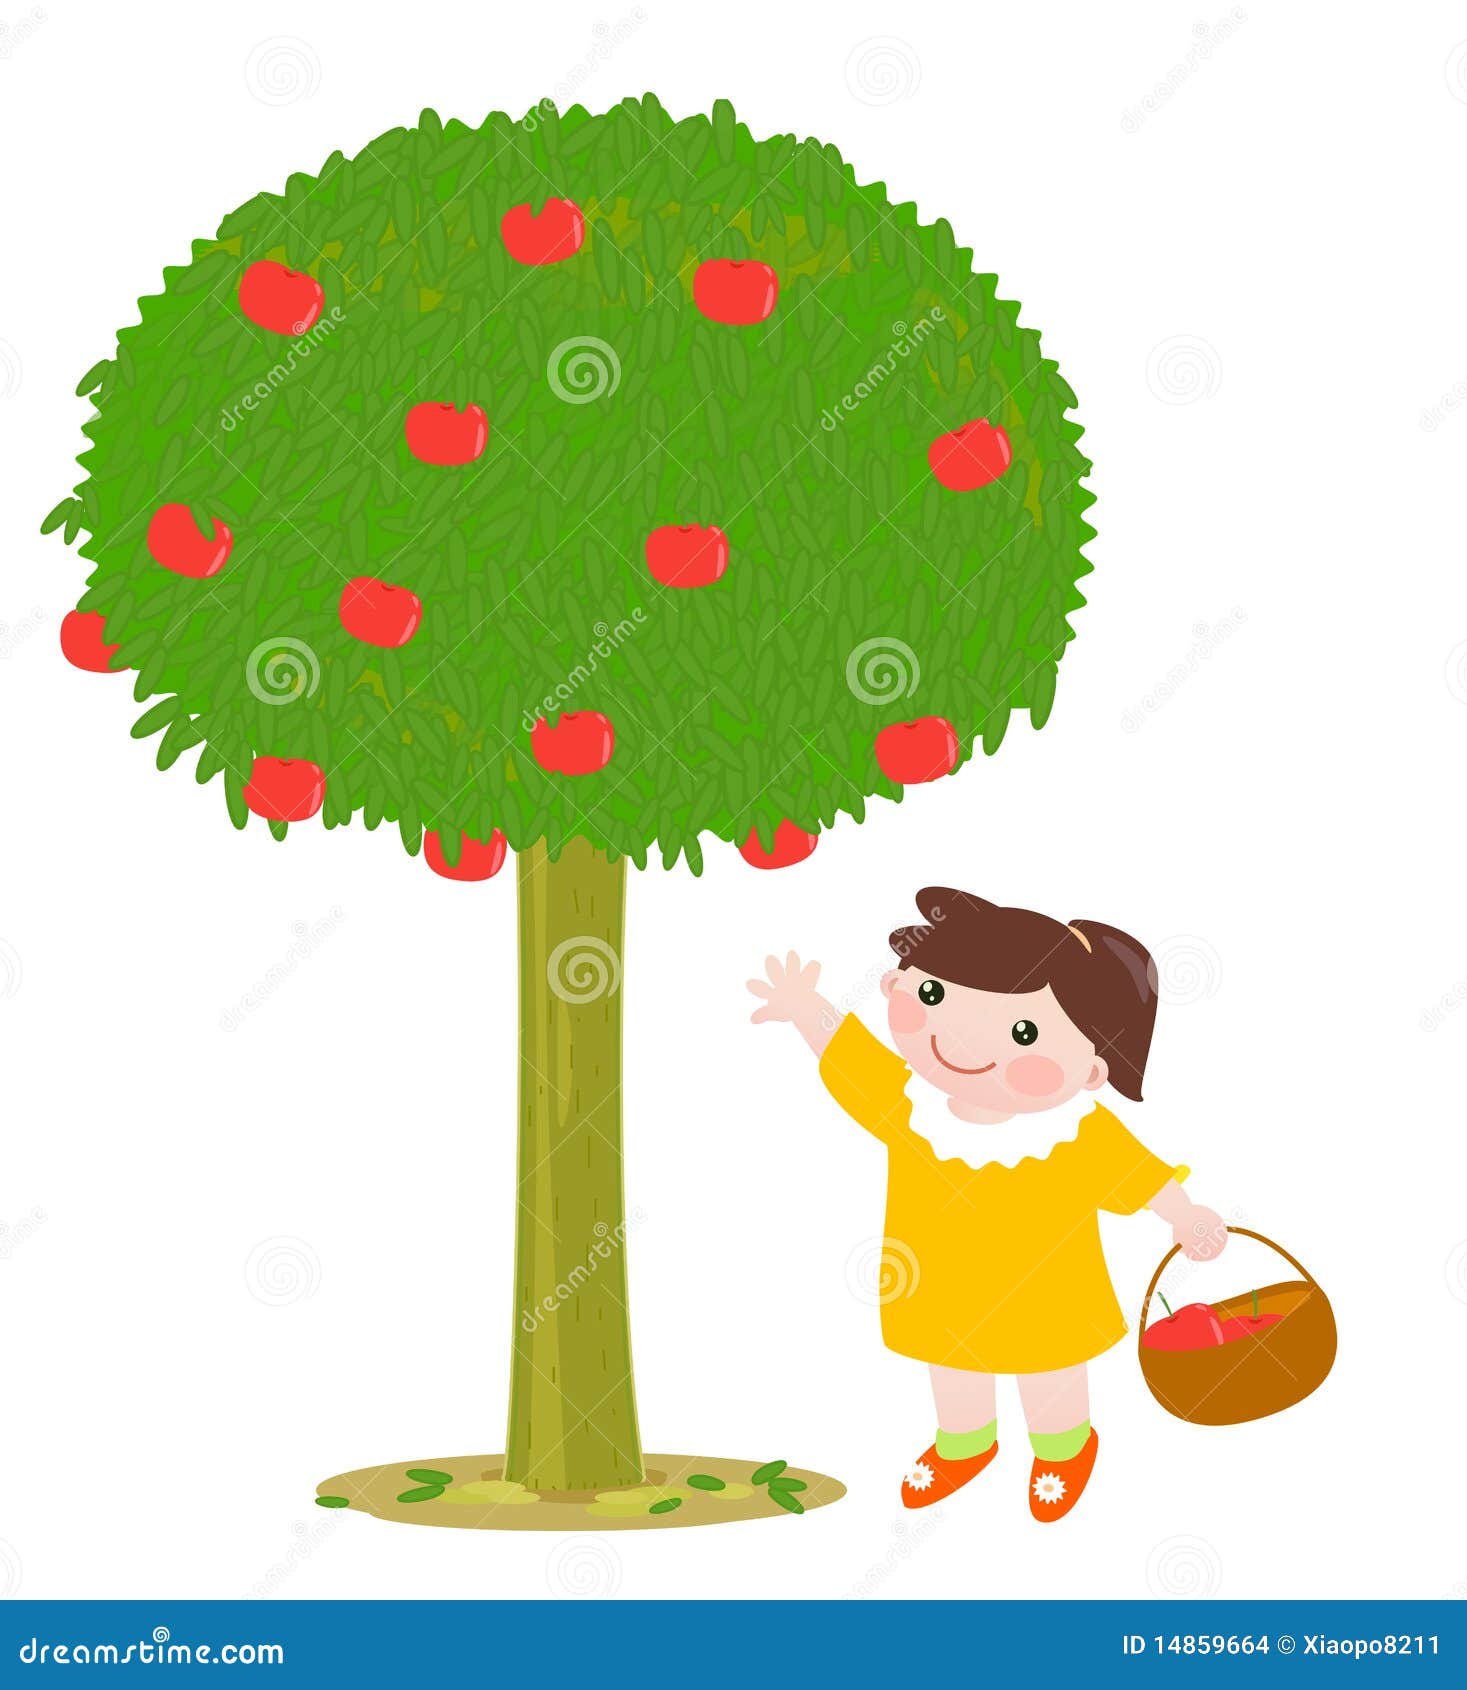 apple picking clipart - photo #10